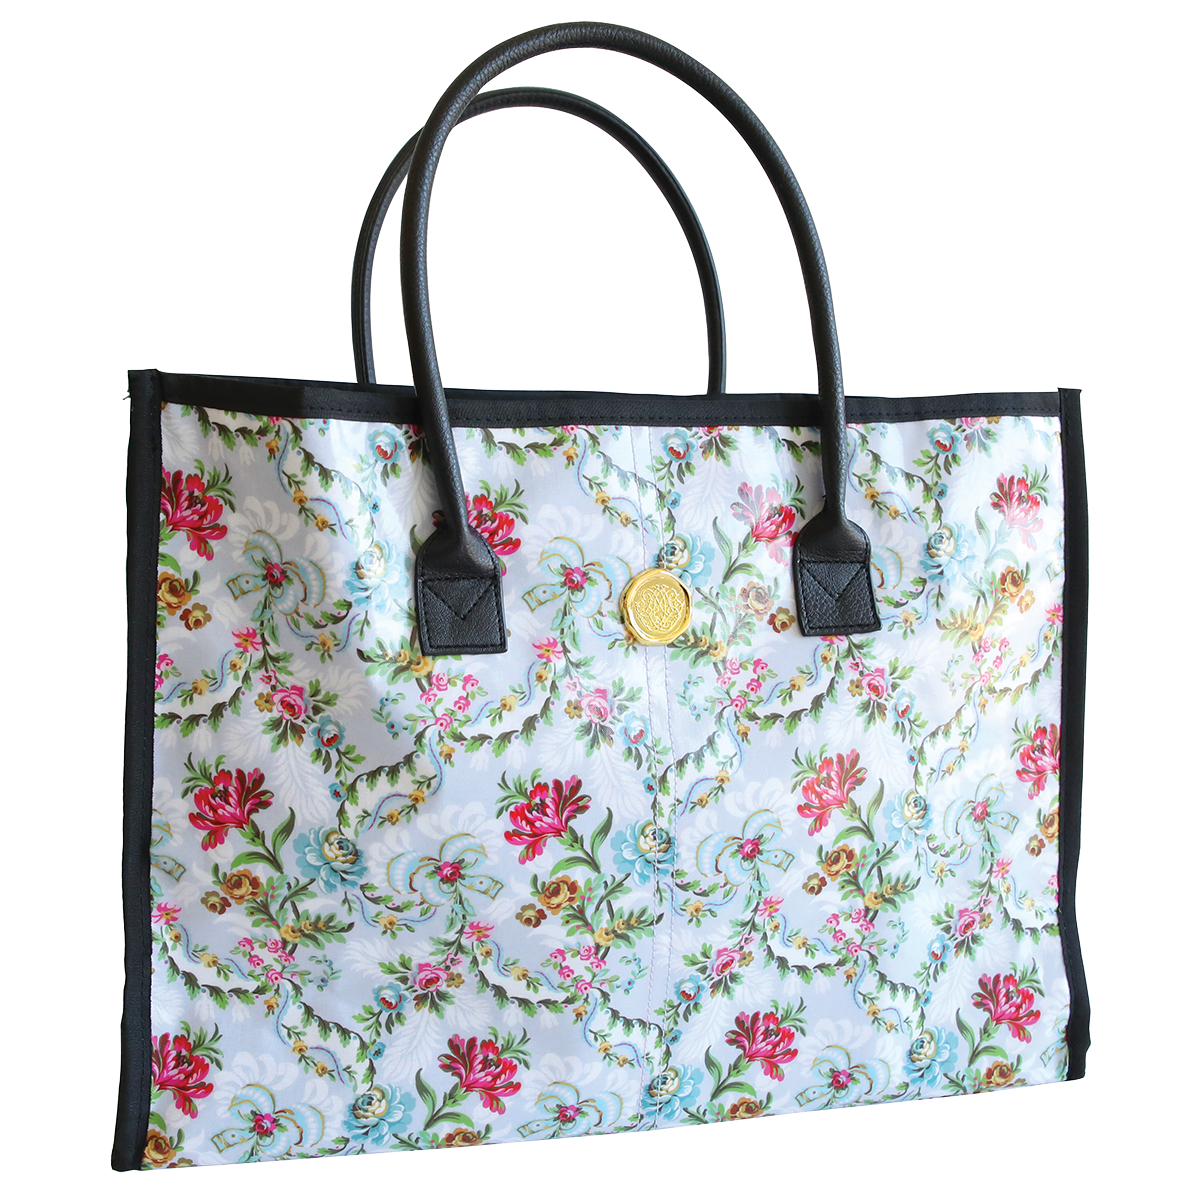 Phoebe Tote Bag with black handles and a circular gold emblem on the front, isolated on a white background.